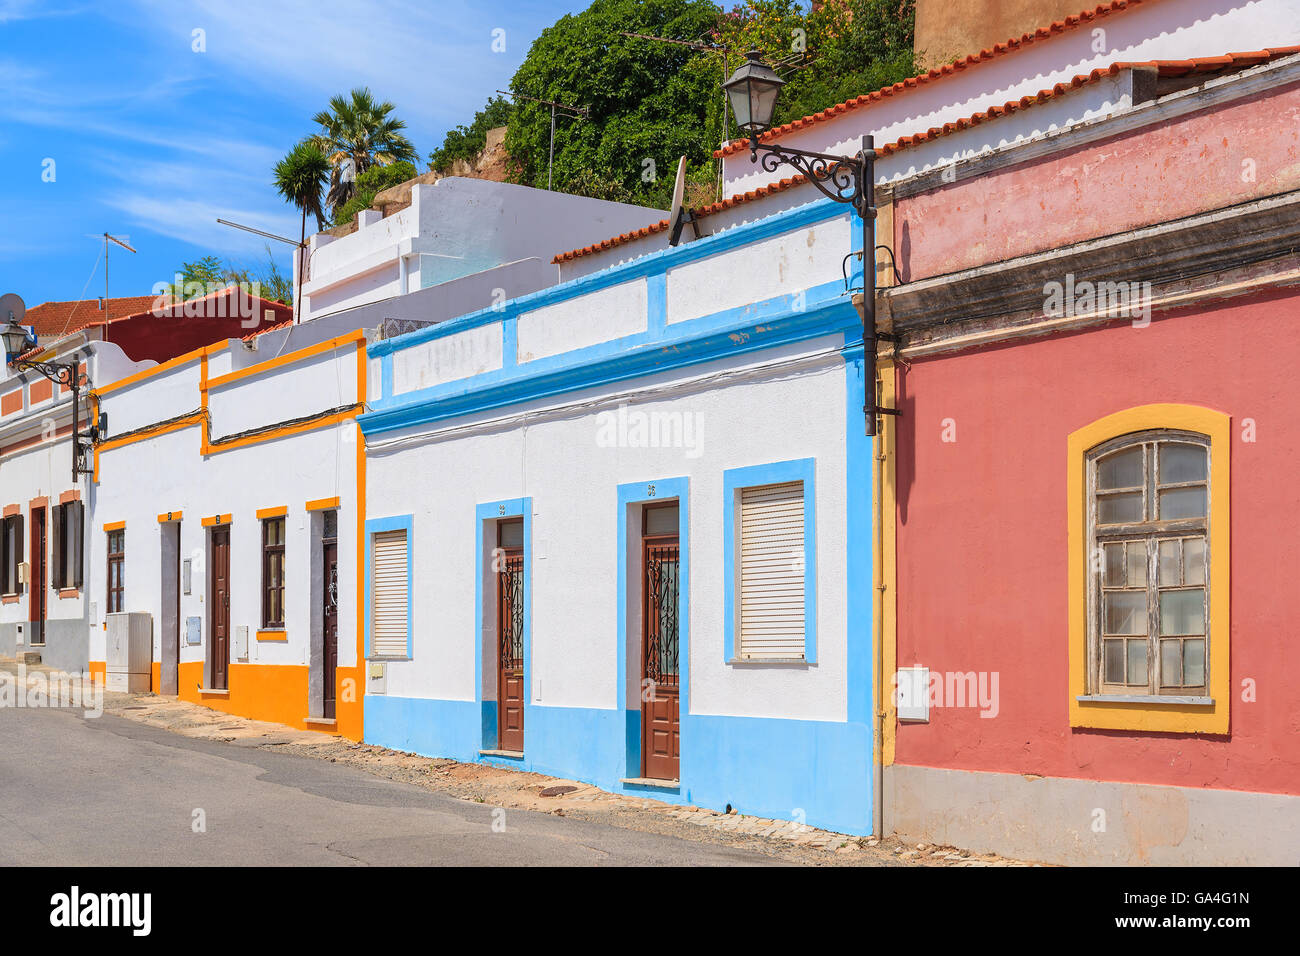 Colorful houses along a street in Portuguese historic town of Silves, Algarve region, Portugal Stock Photo